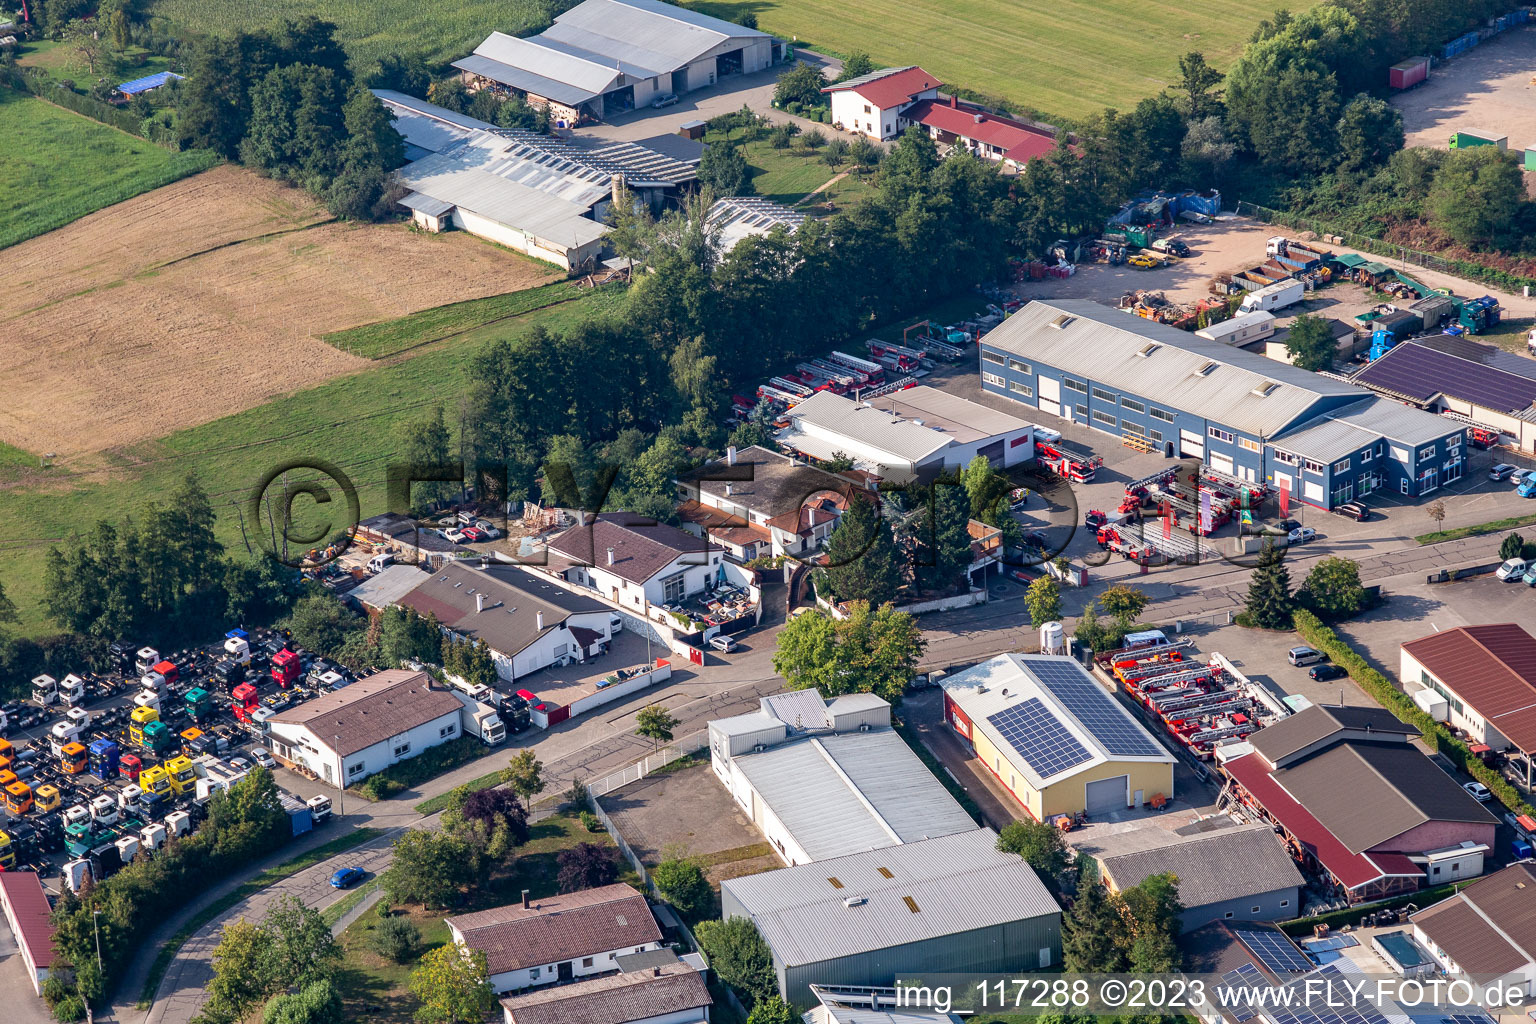 Aerial view of Horst industrial area in the district Minderslachen in Kandel in the state Rhineland-Palatinate, Germany